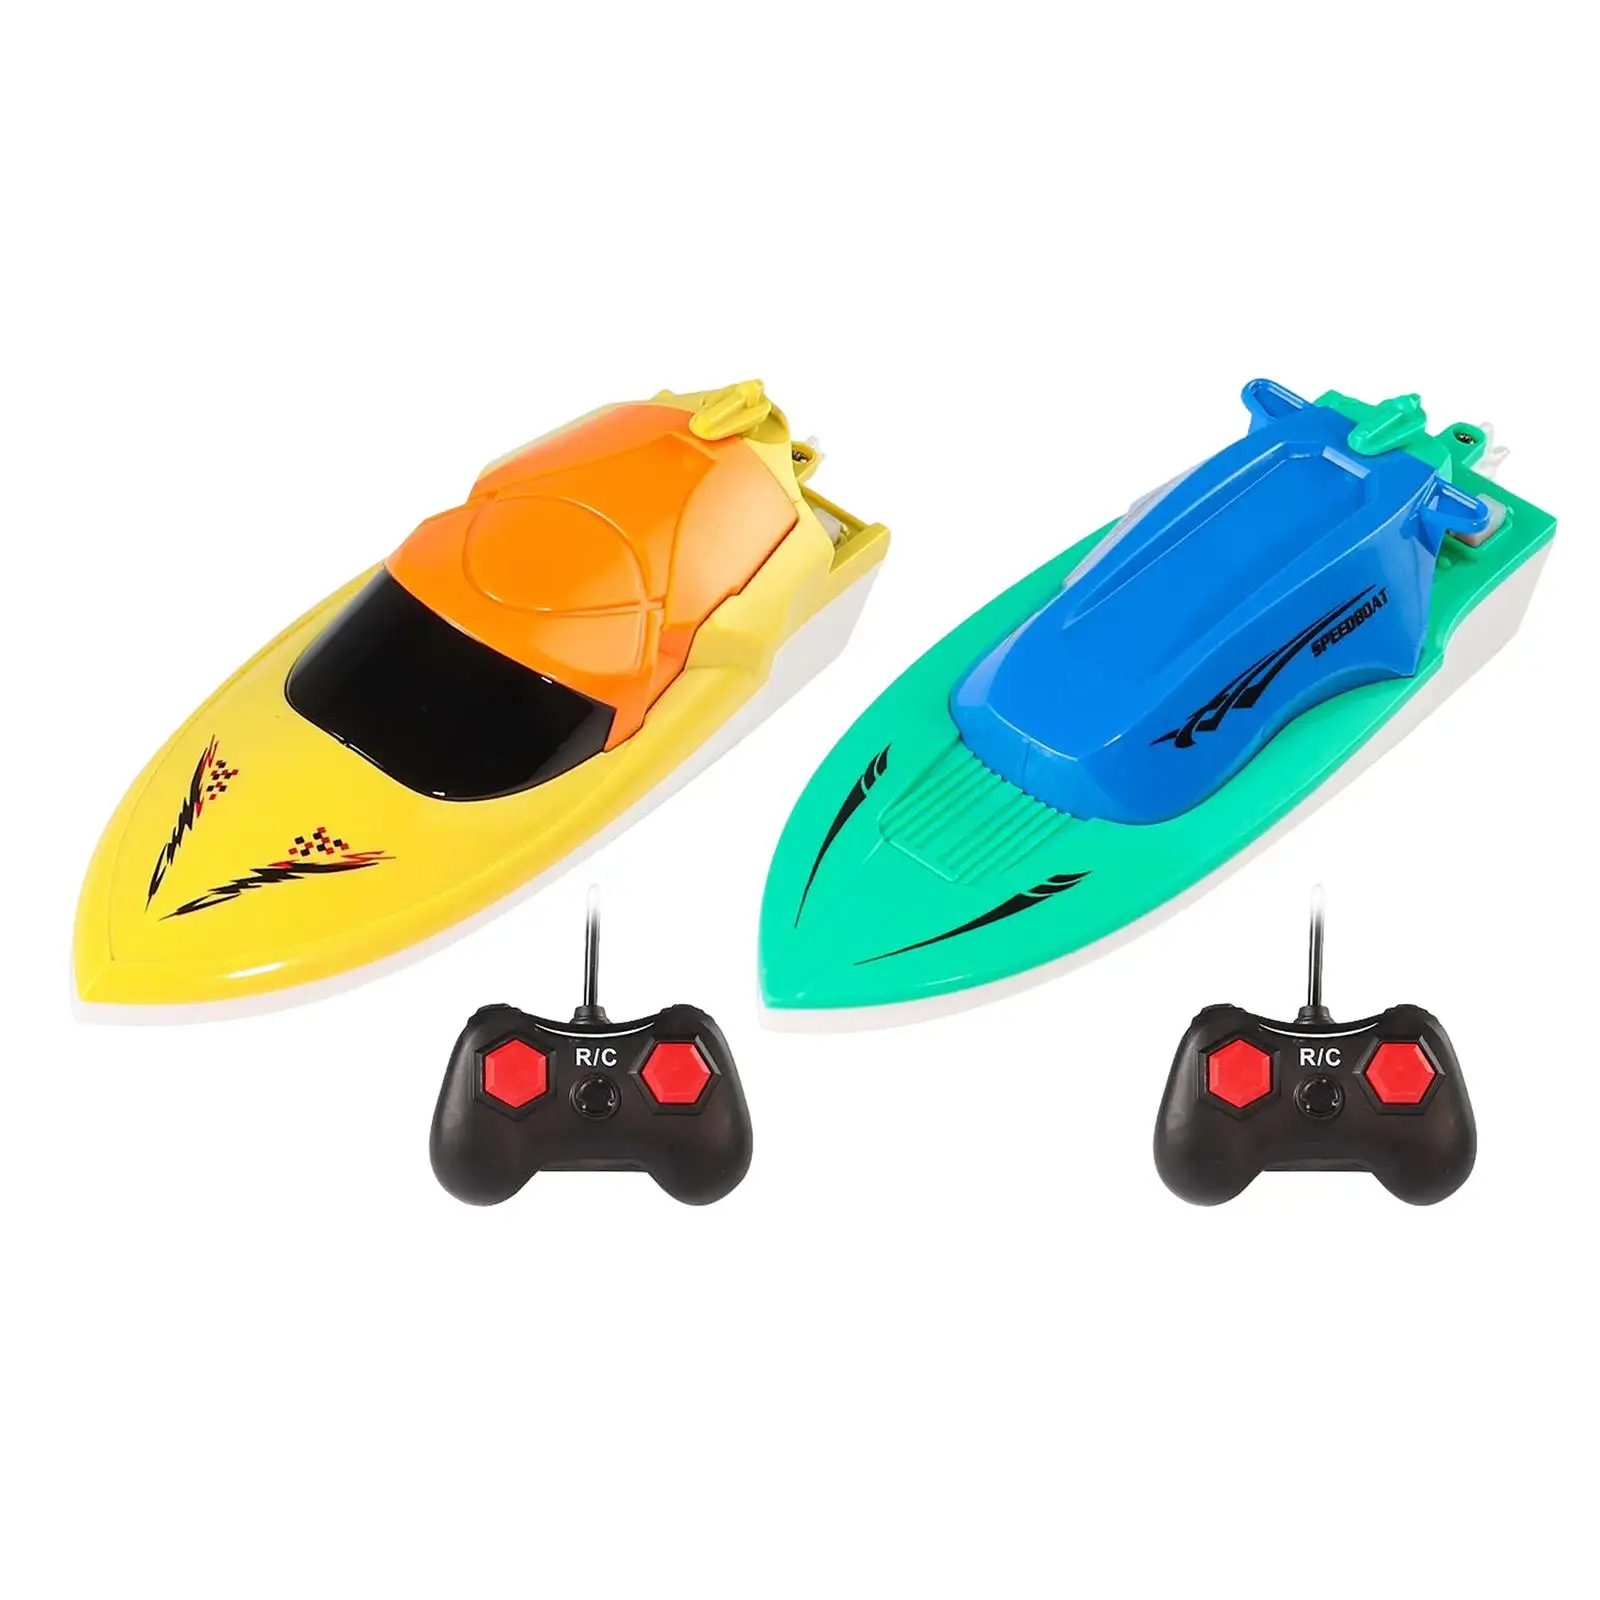 Boat Toy with Remote Control Lake Toys for Children and Adults